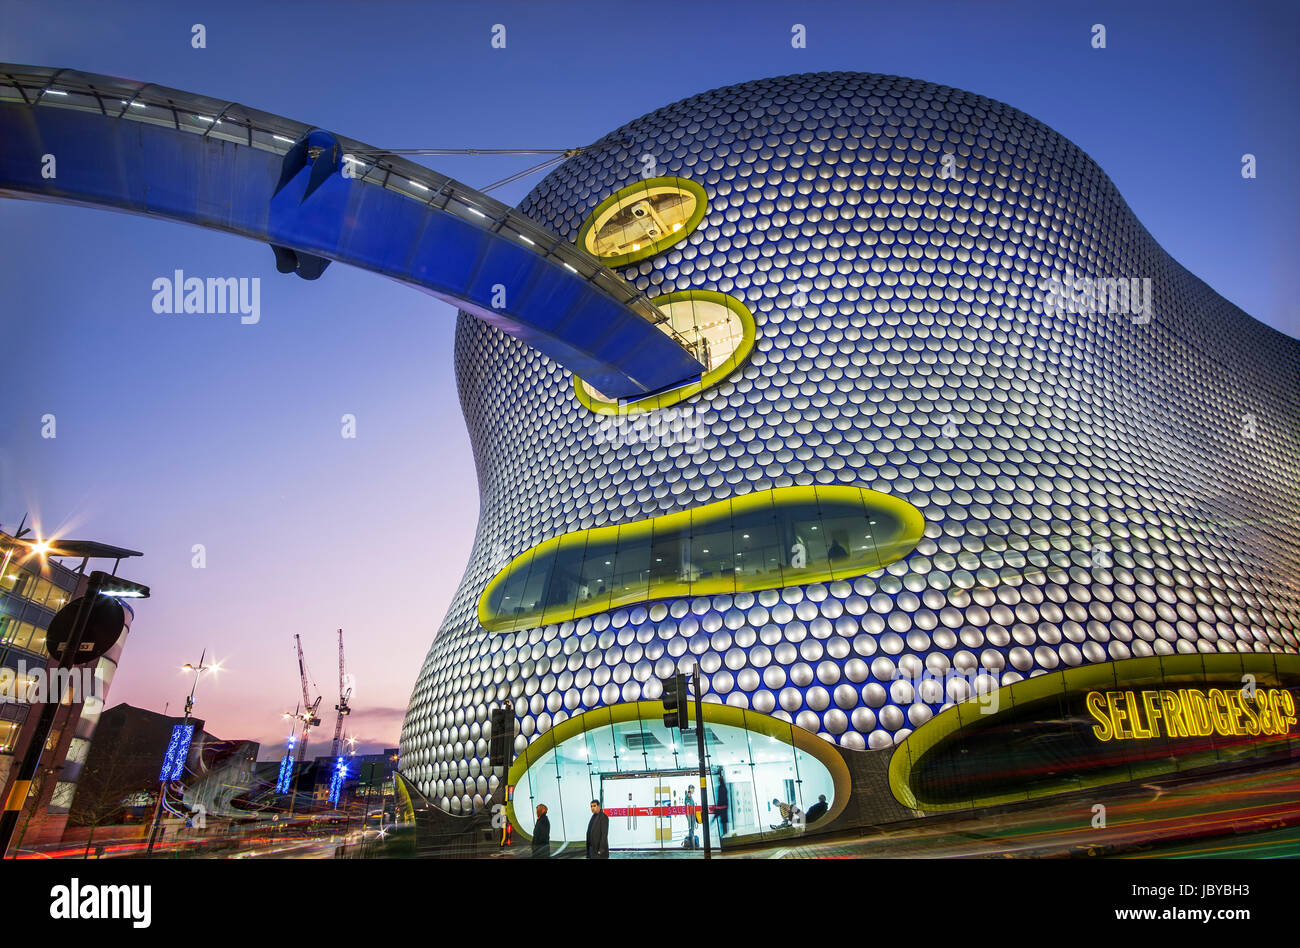 The Stunning and Quirky Selfridges & Co Building in Birmingham, UK Stock Photo